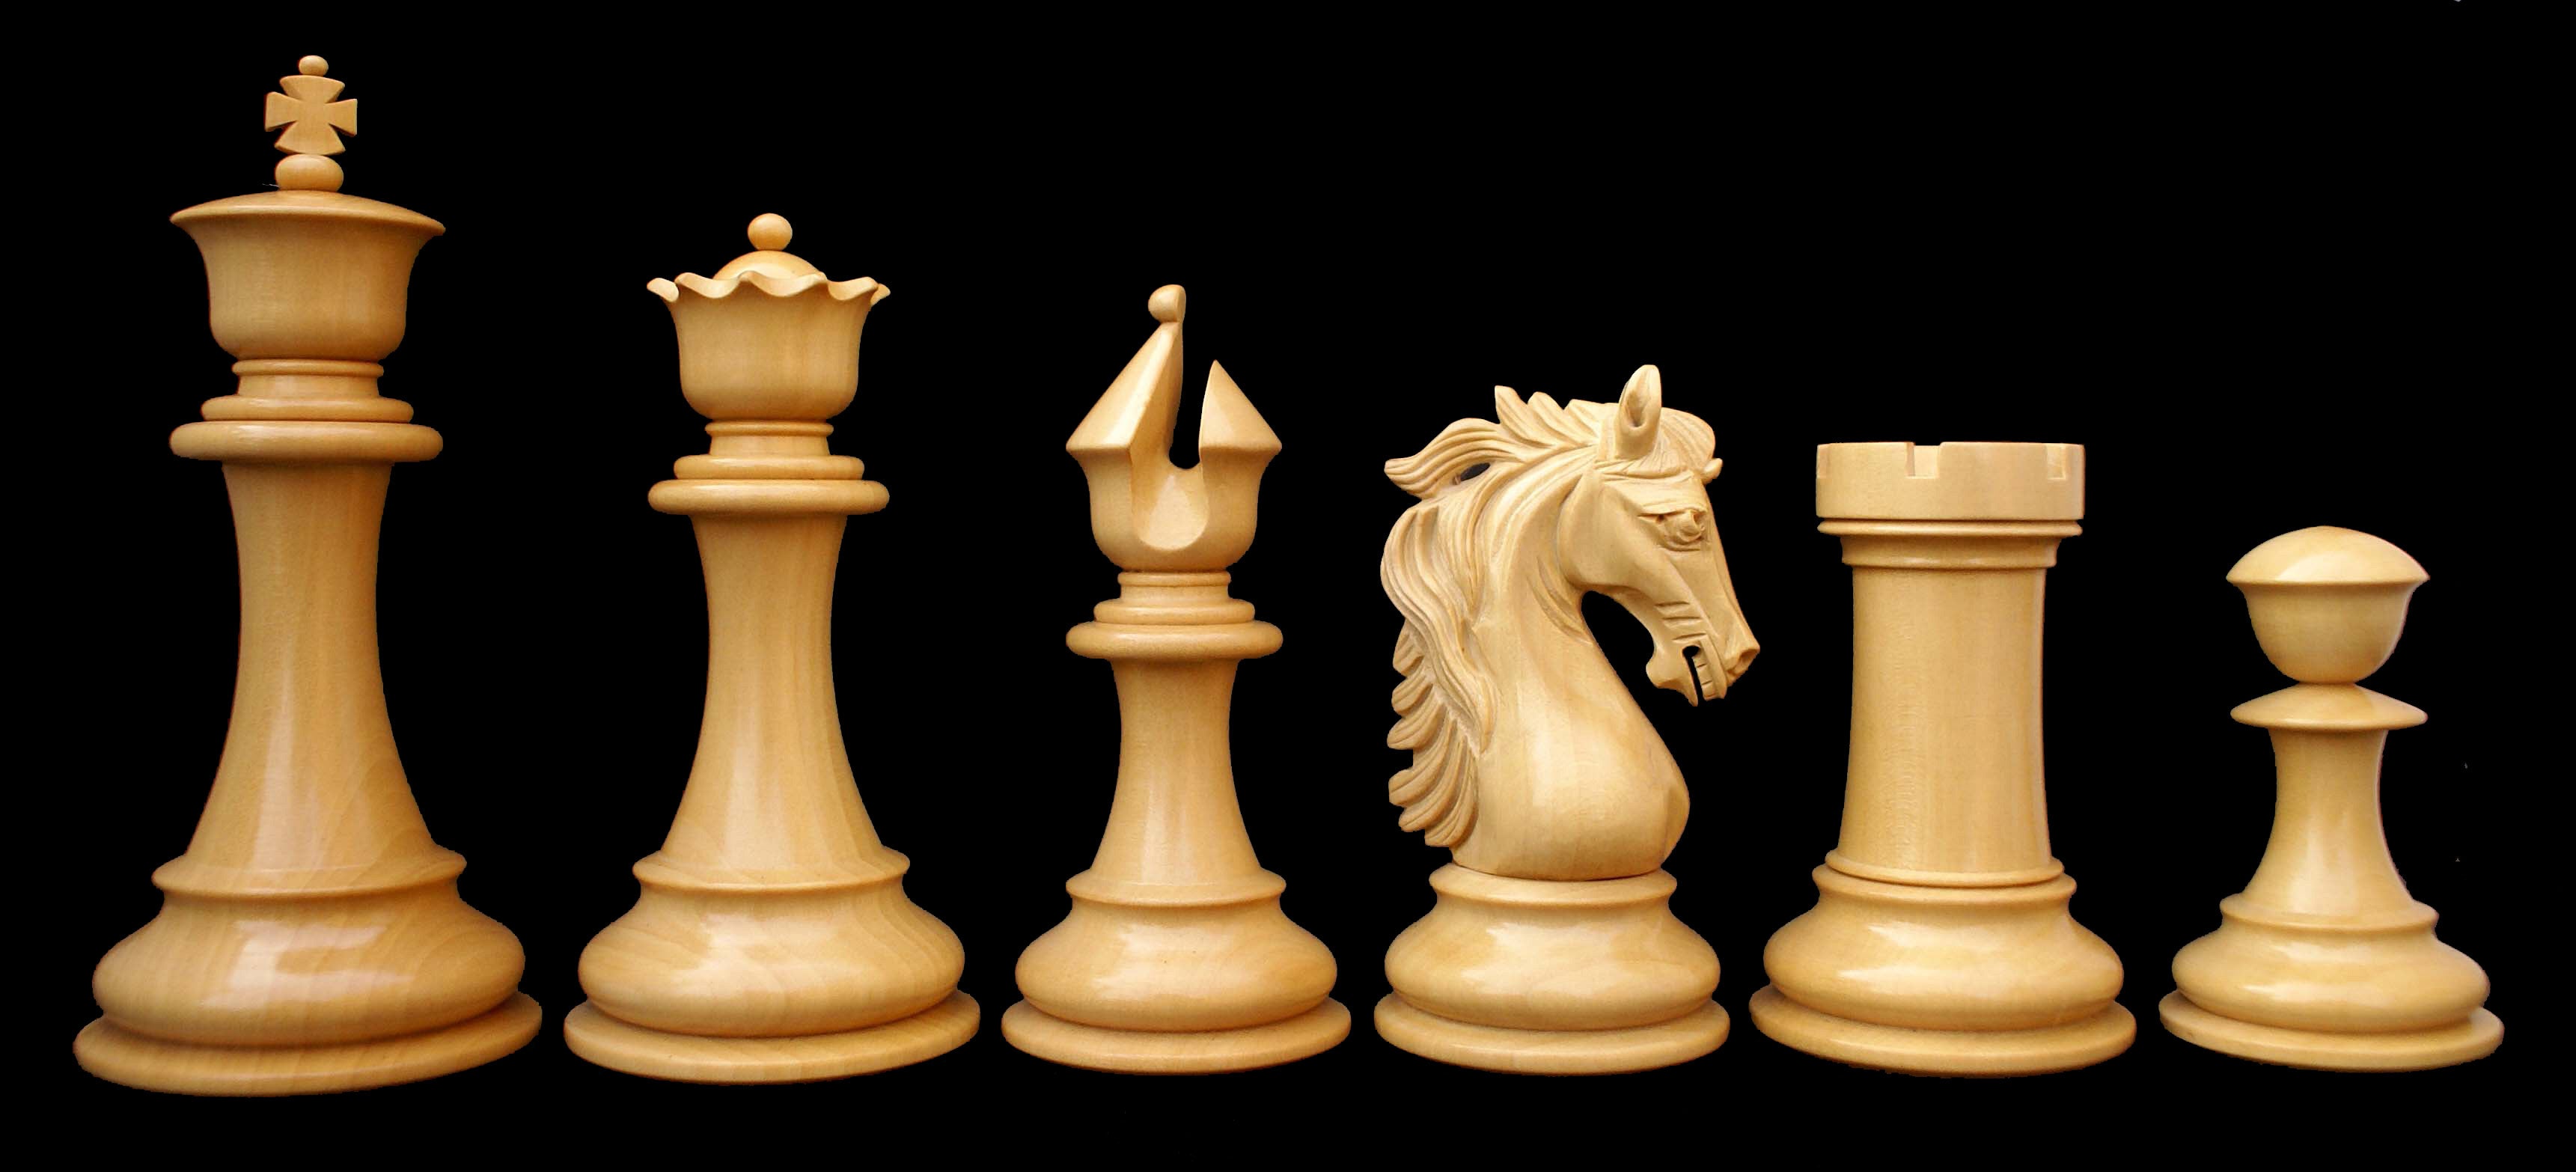 Westminster Series 4.4 Luxury Chess set in Ebony and Box Wood – Staunton  Castle